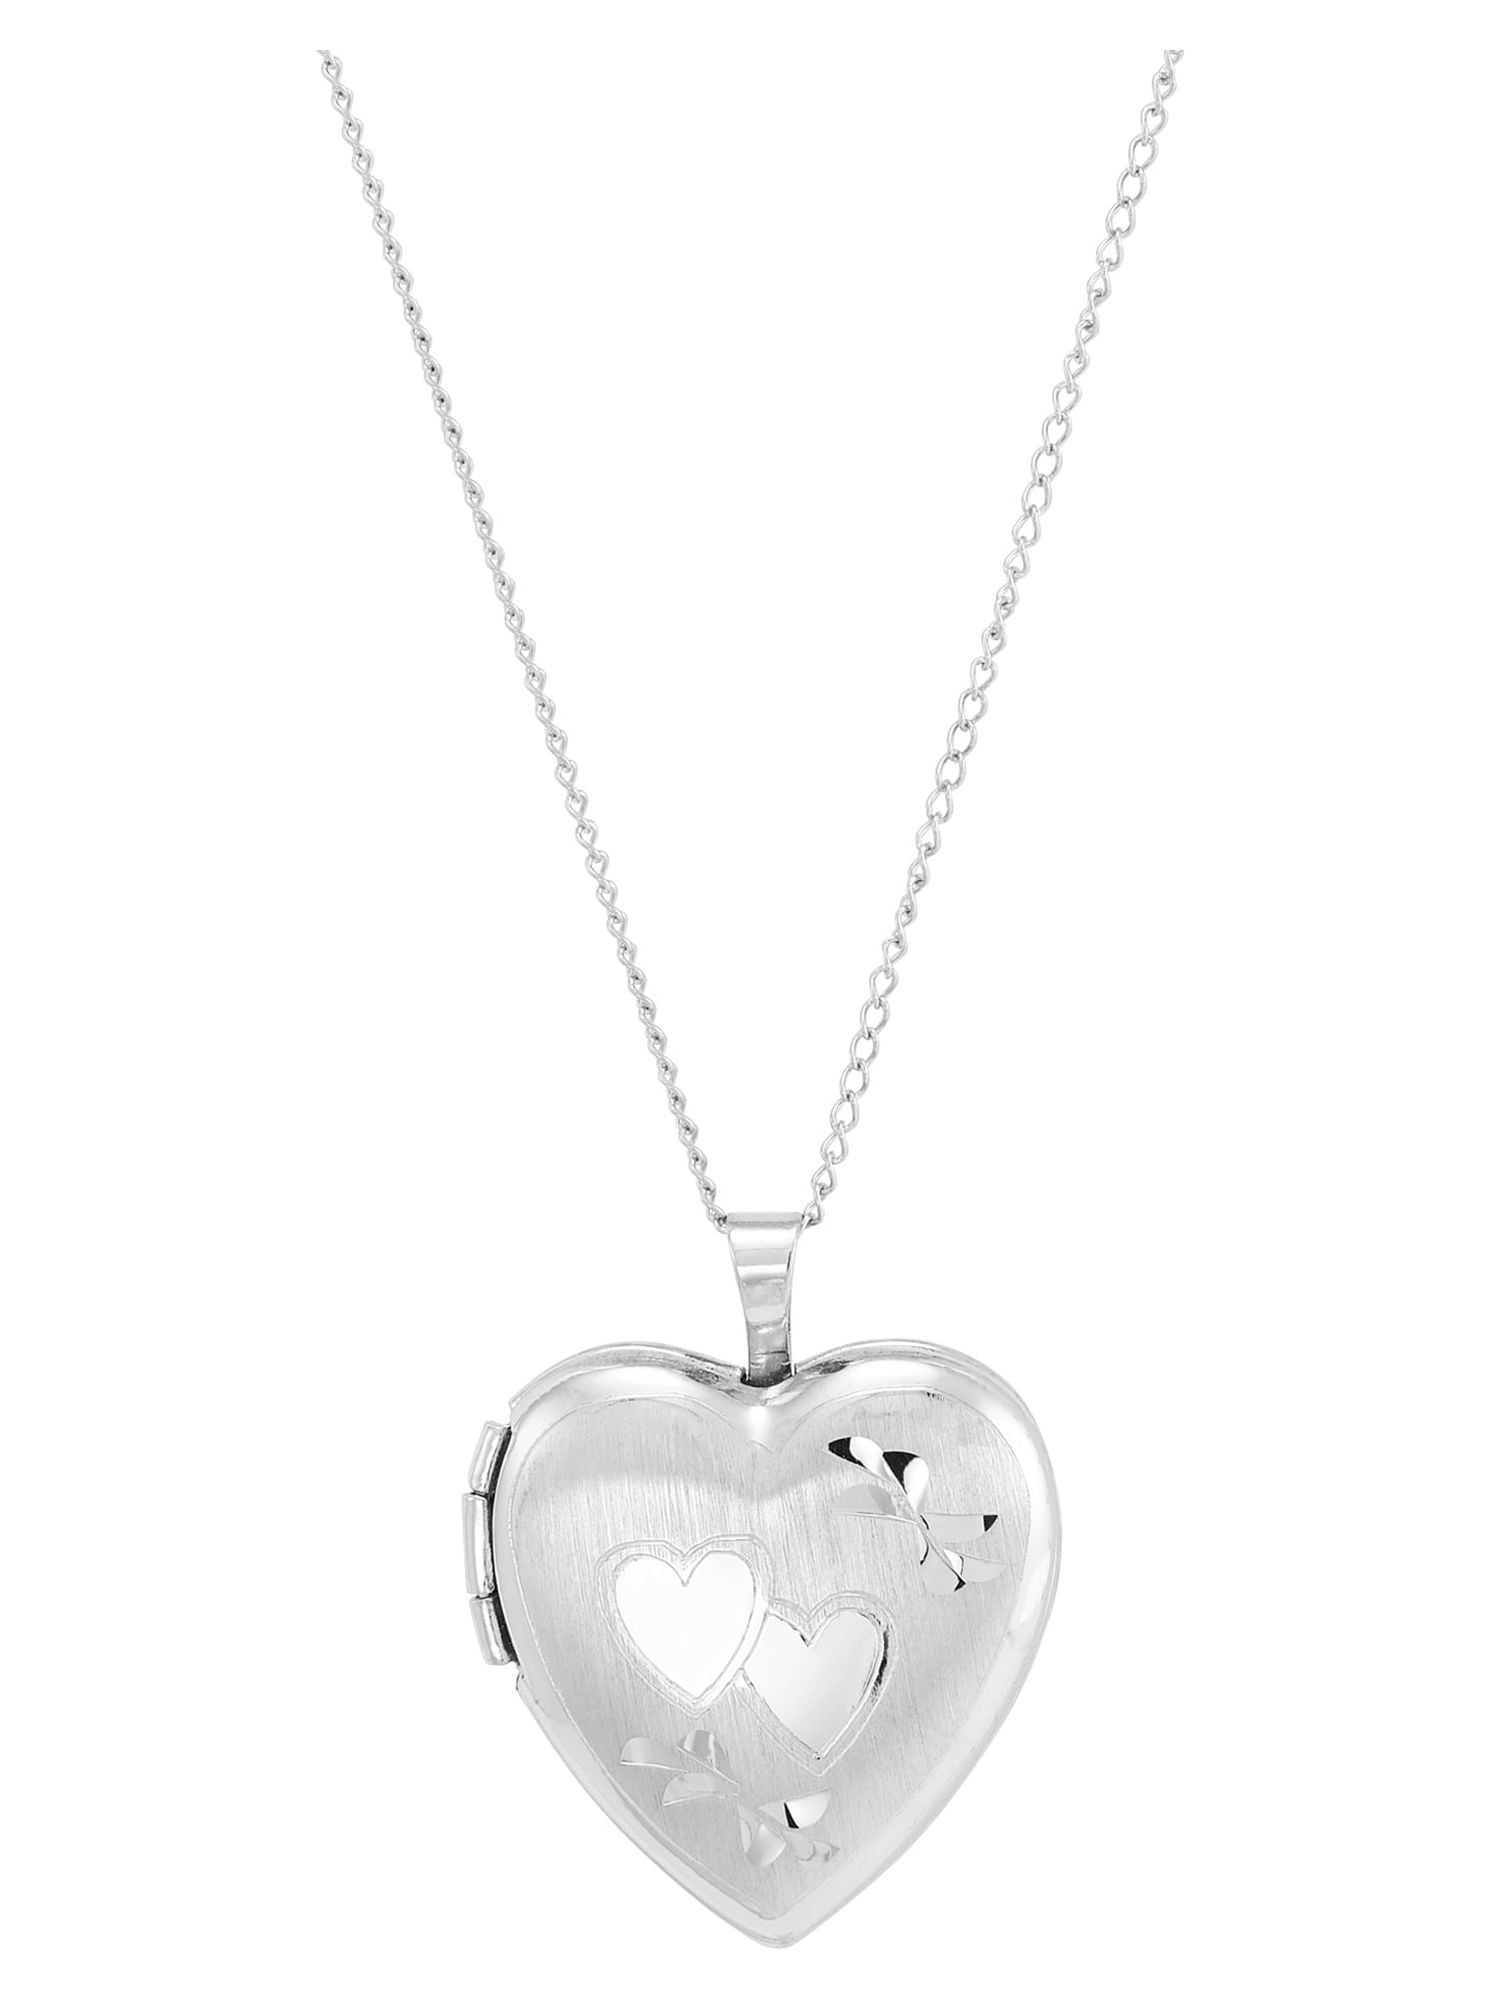 Two Silver Hearts Necklace with Engraving, Personalised Jewellery. Real  Silver | eBay